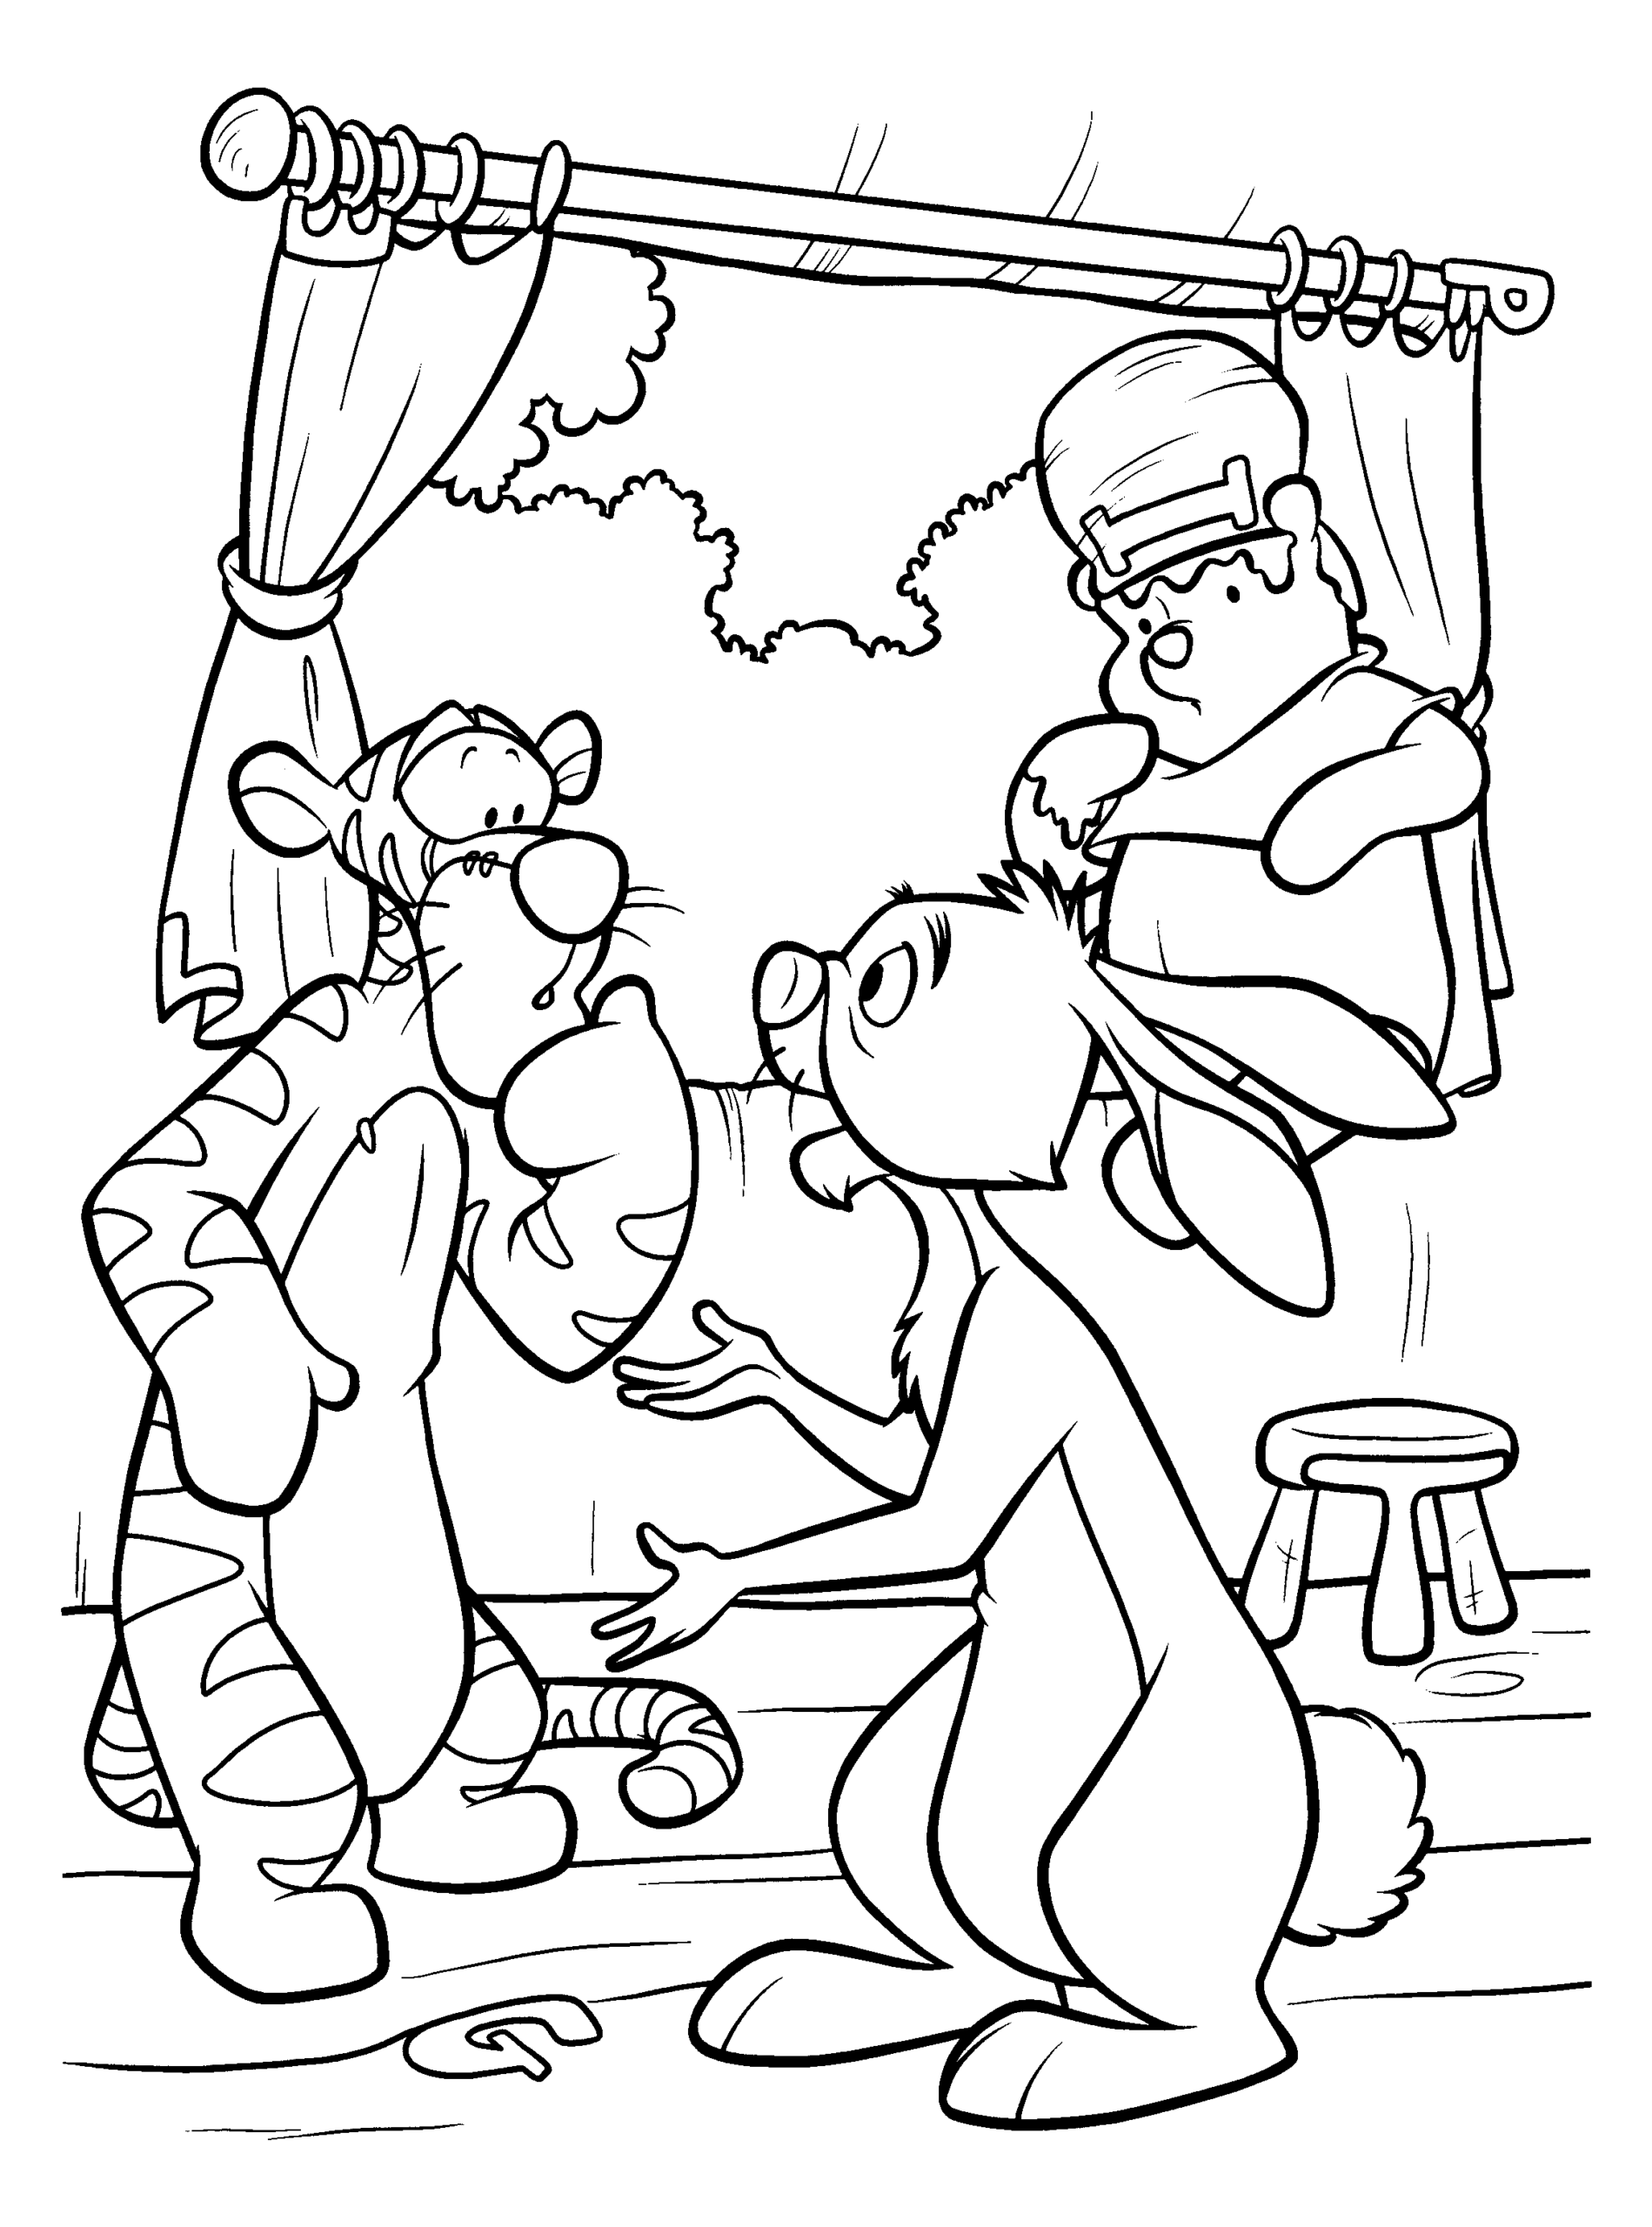 Winnie the Pooh Coloring Pages Cartoons winnie the pooh 23 Printable 2020 7123 Coloring4free